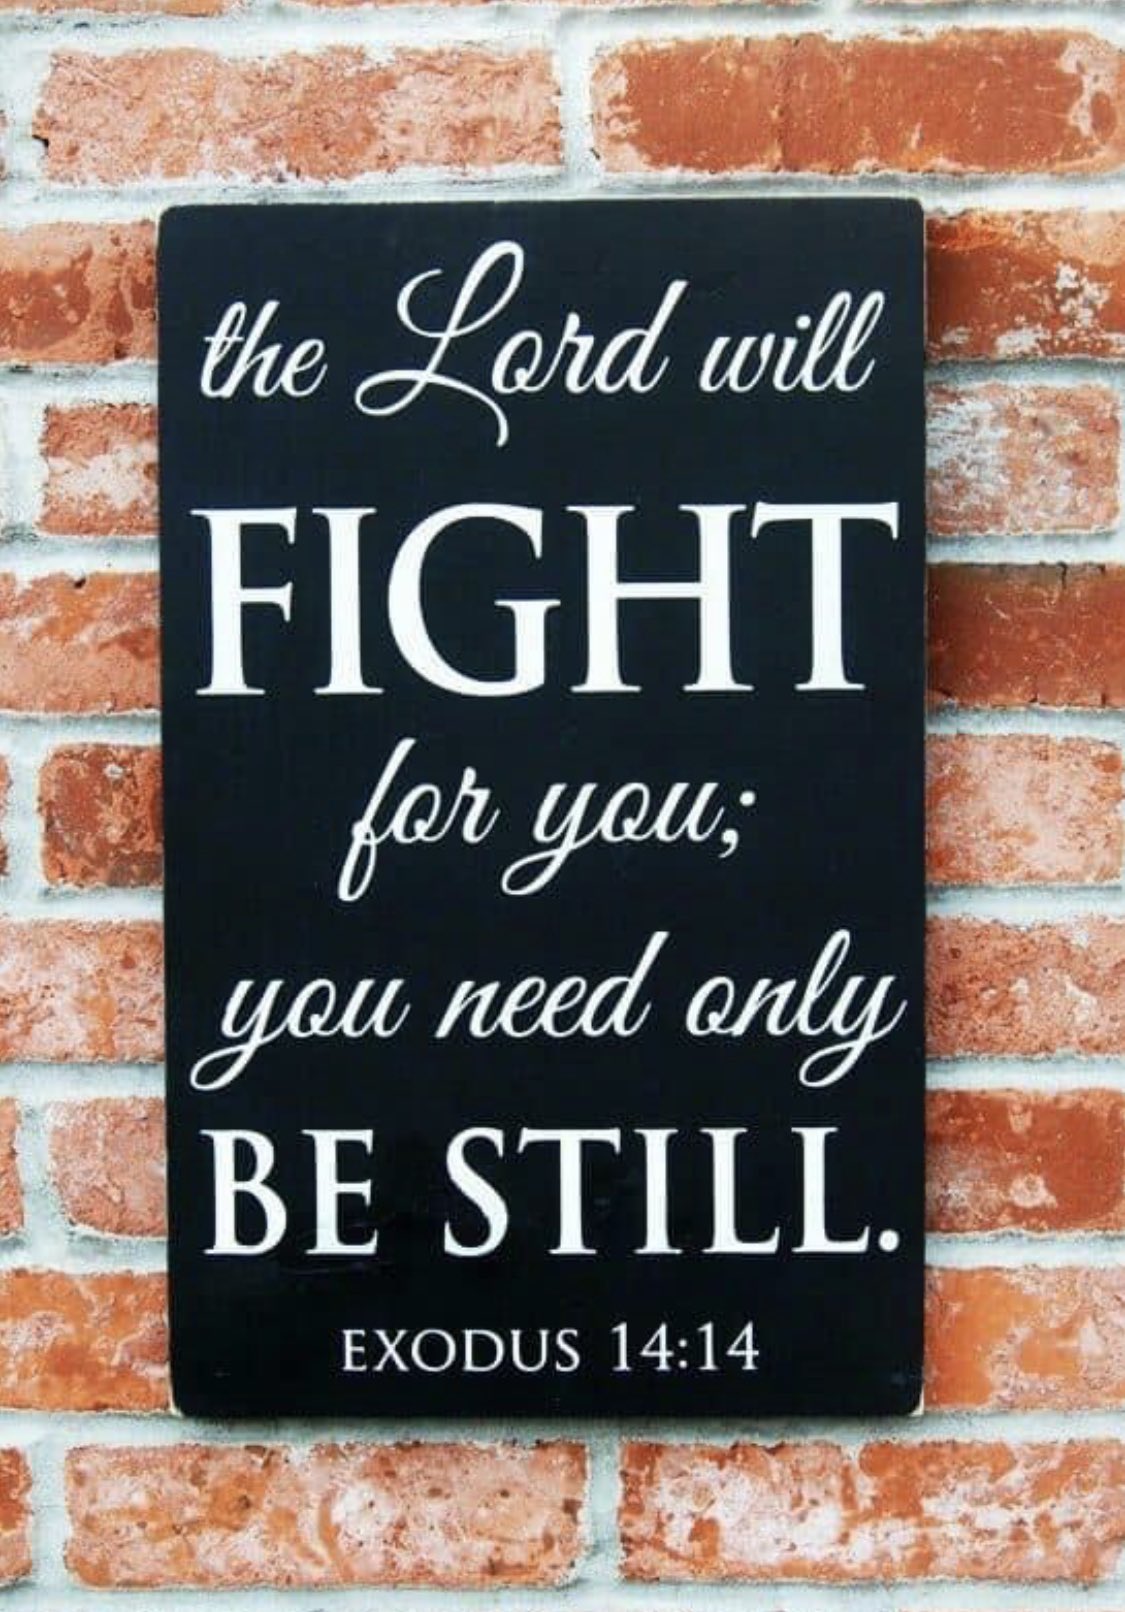 the Yond will FIGHT {oh ycu; yqu need only BE STILL EXODUS 14.14